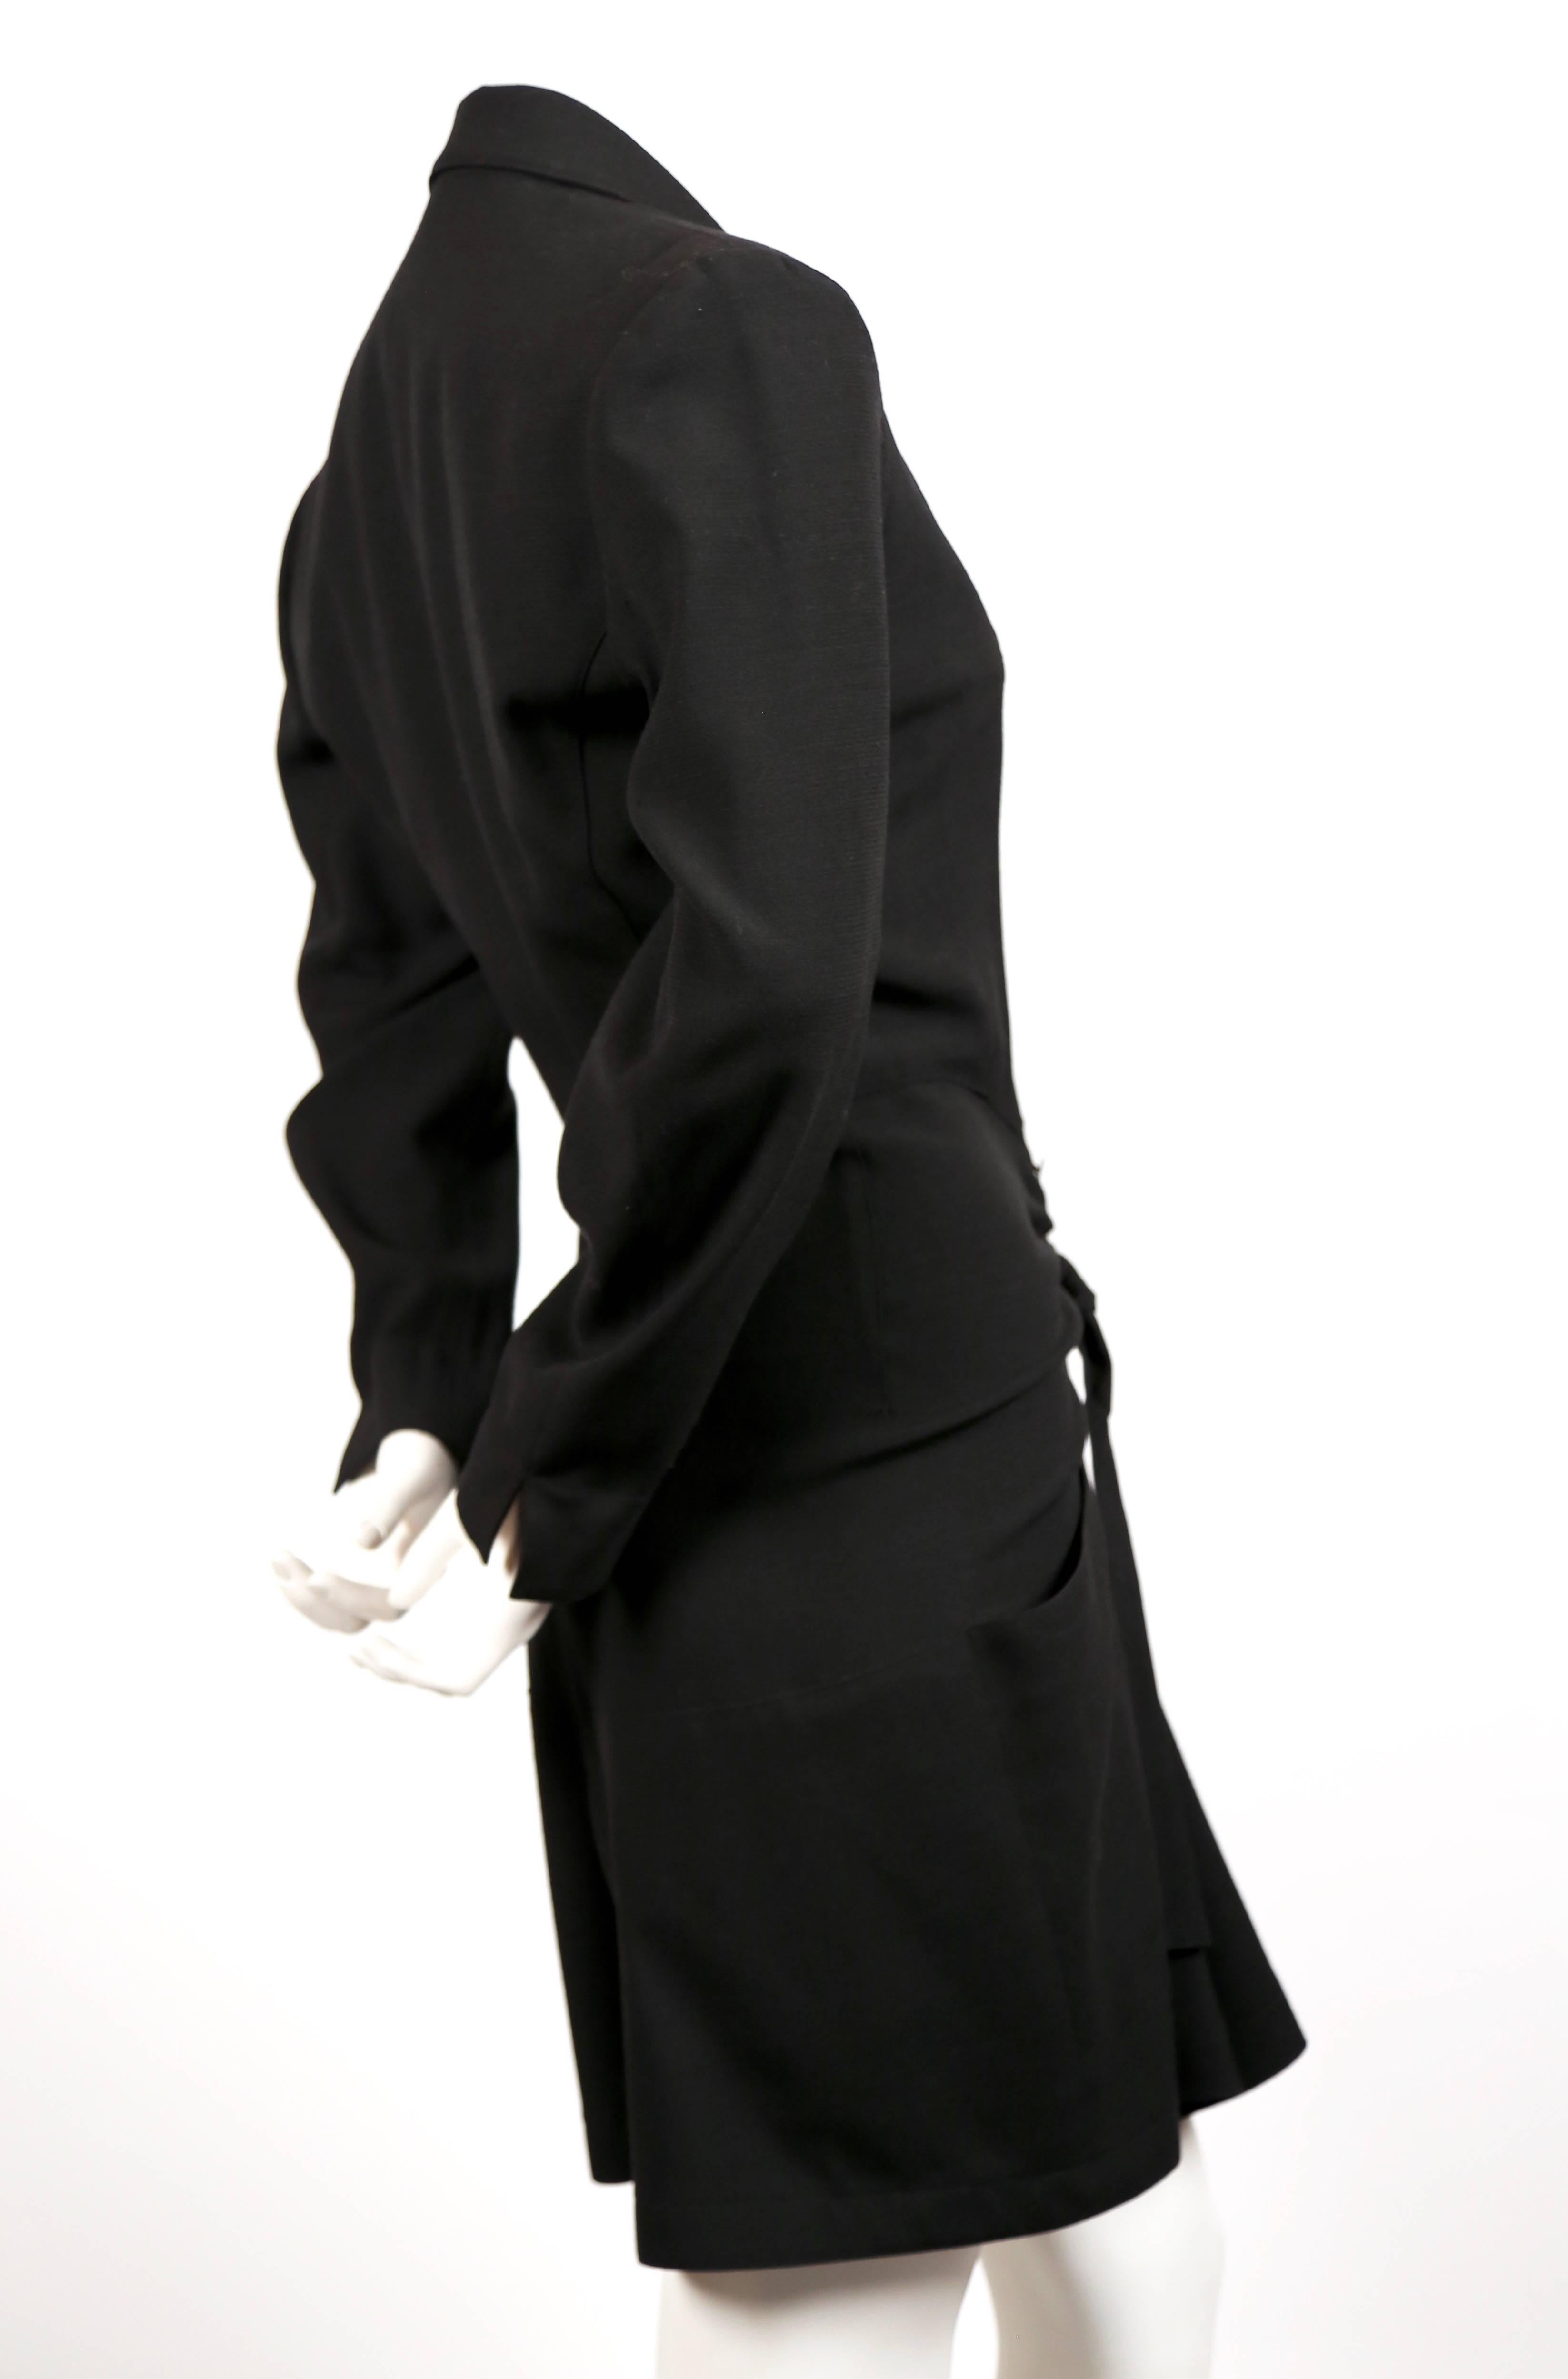 Black romper suit designed by Azzedine Alaia dating to spring of 1989 as seen on the runway. Labeled a FR 38. Approximate measurements: shoulders 15.5